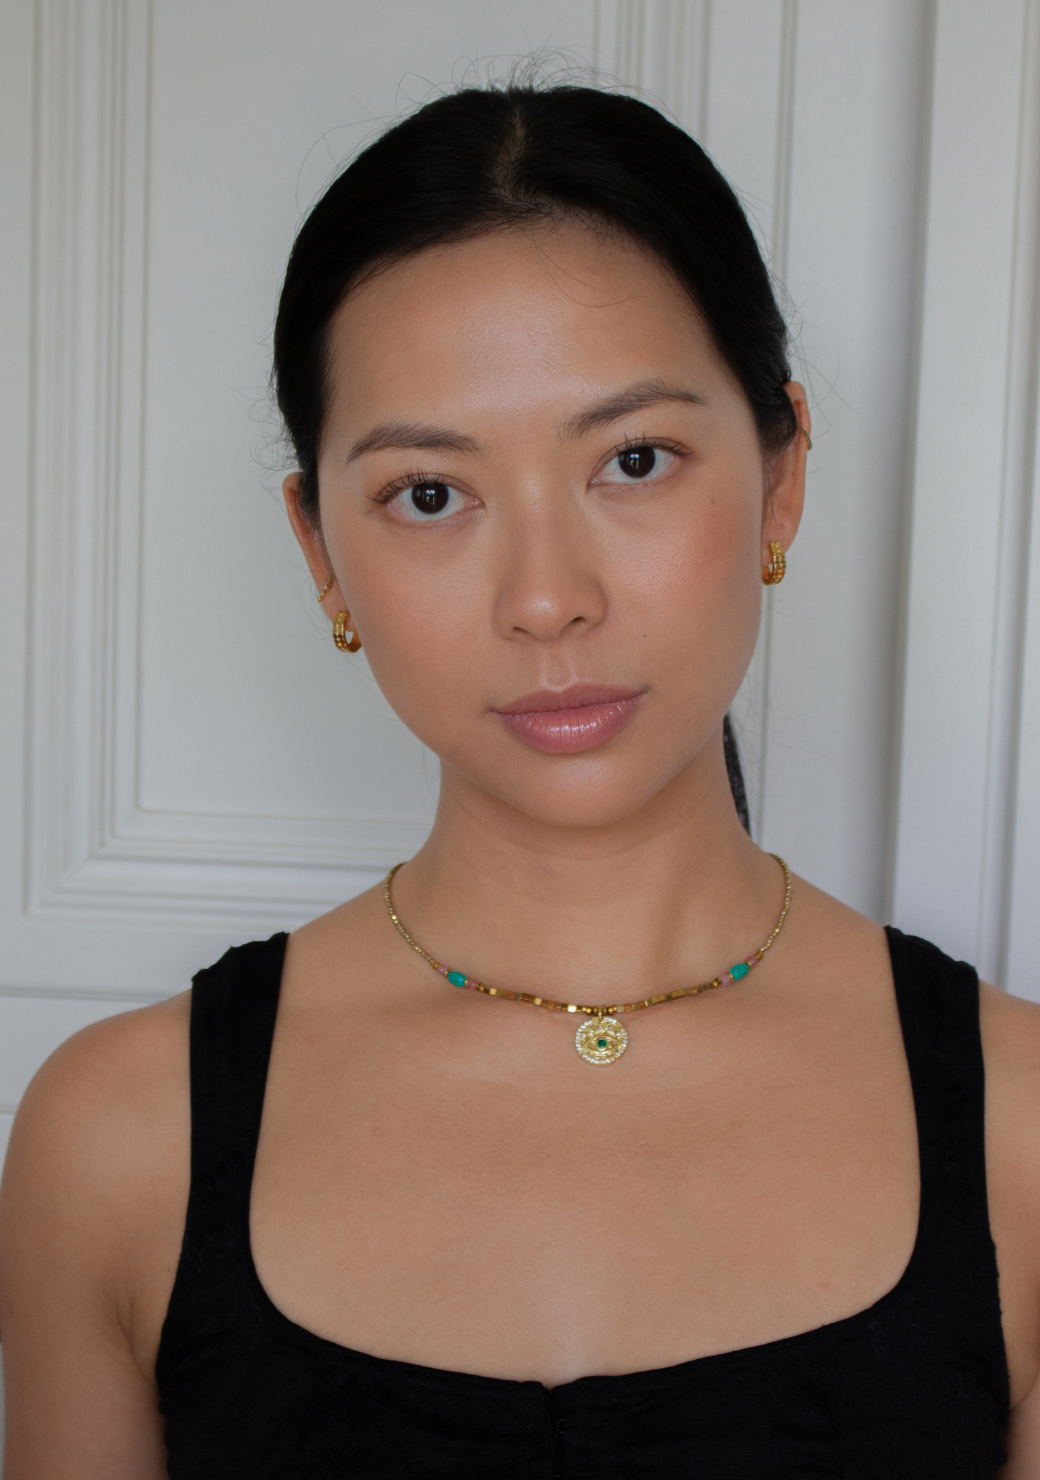 Keira Necklace with Green Evil Eye in Gold